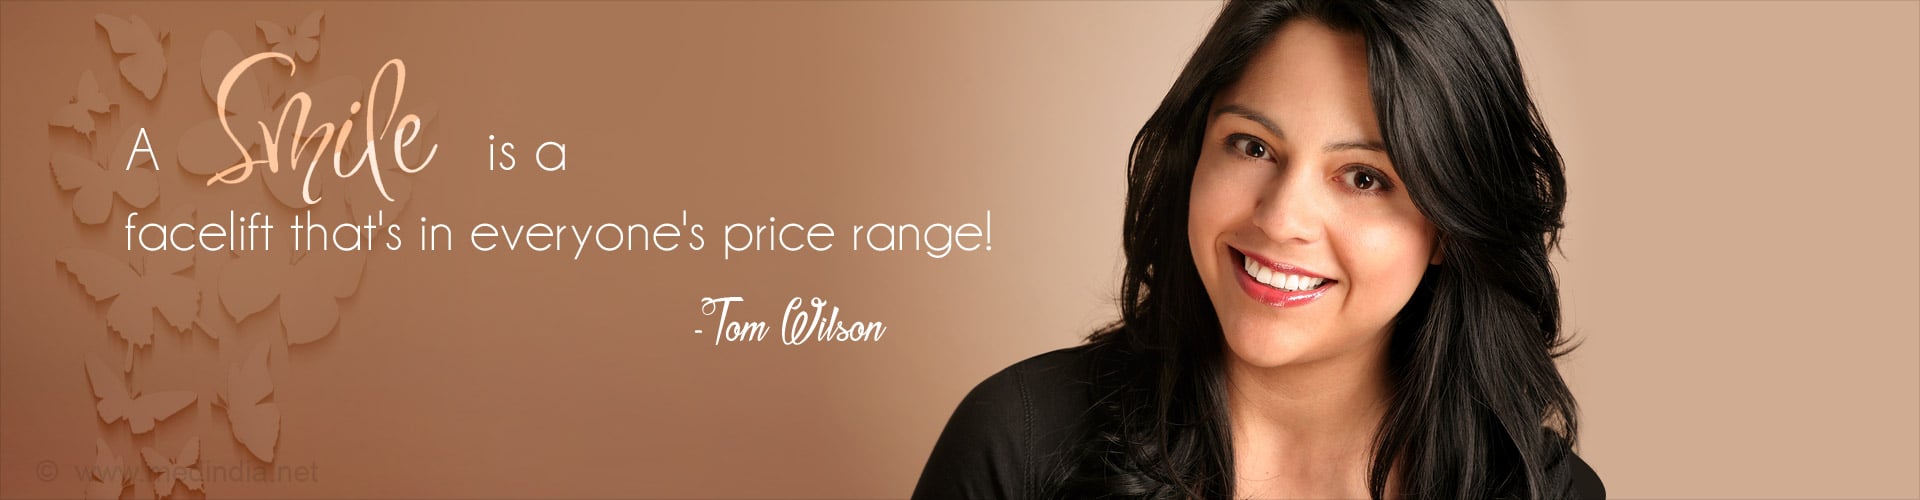 A Smile is a Facelift that's in Everyone's Price Range!- Tom Wilson